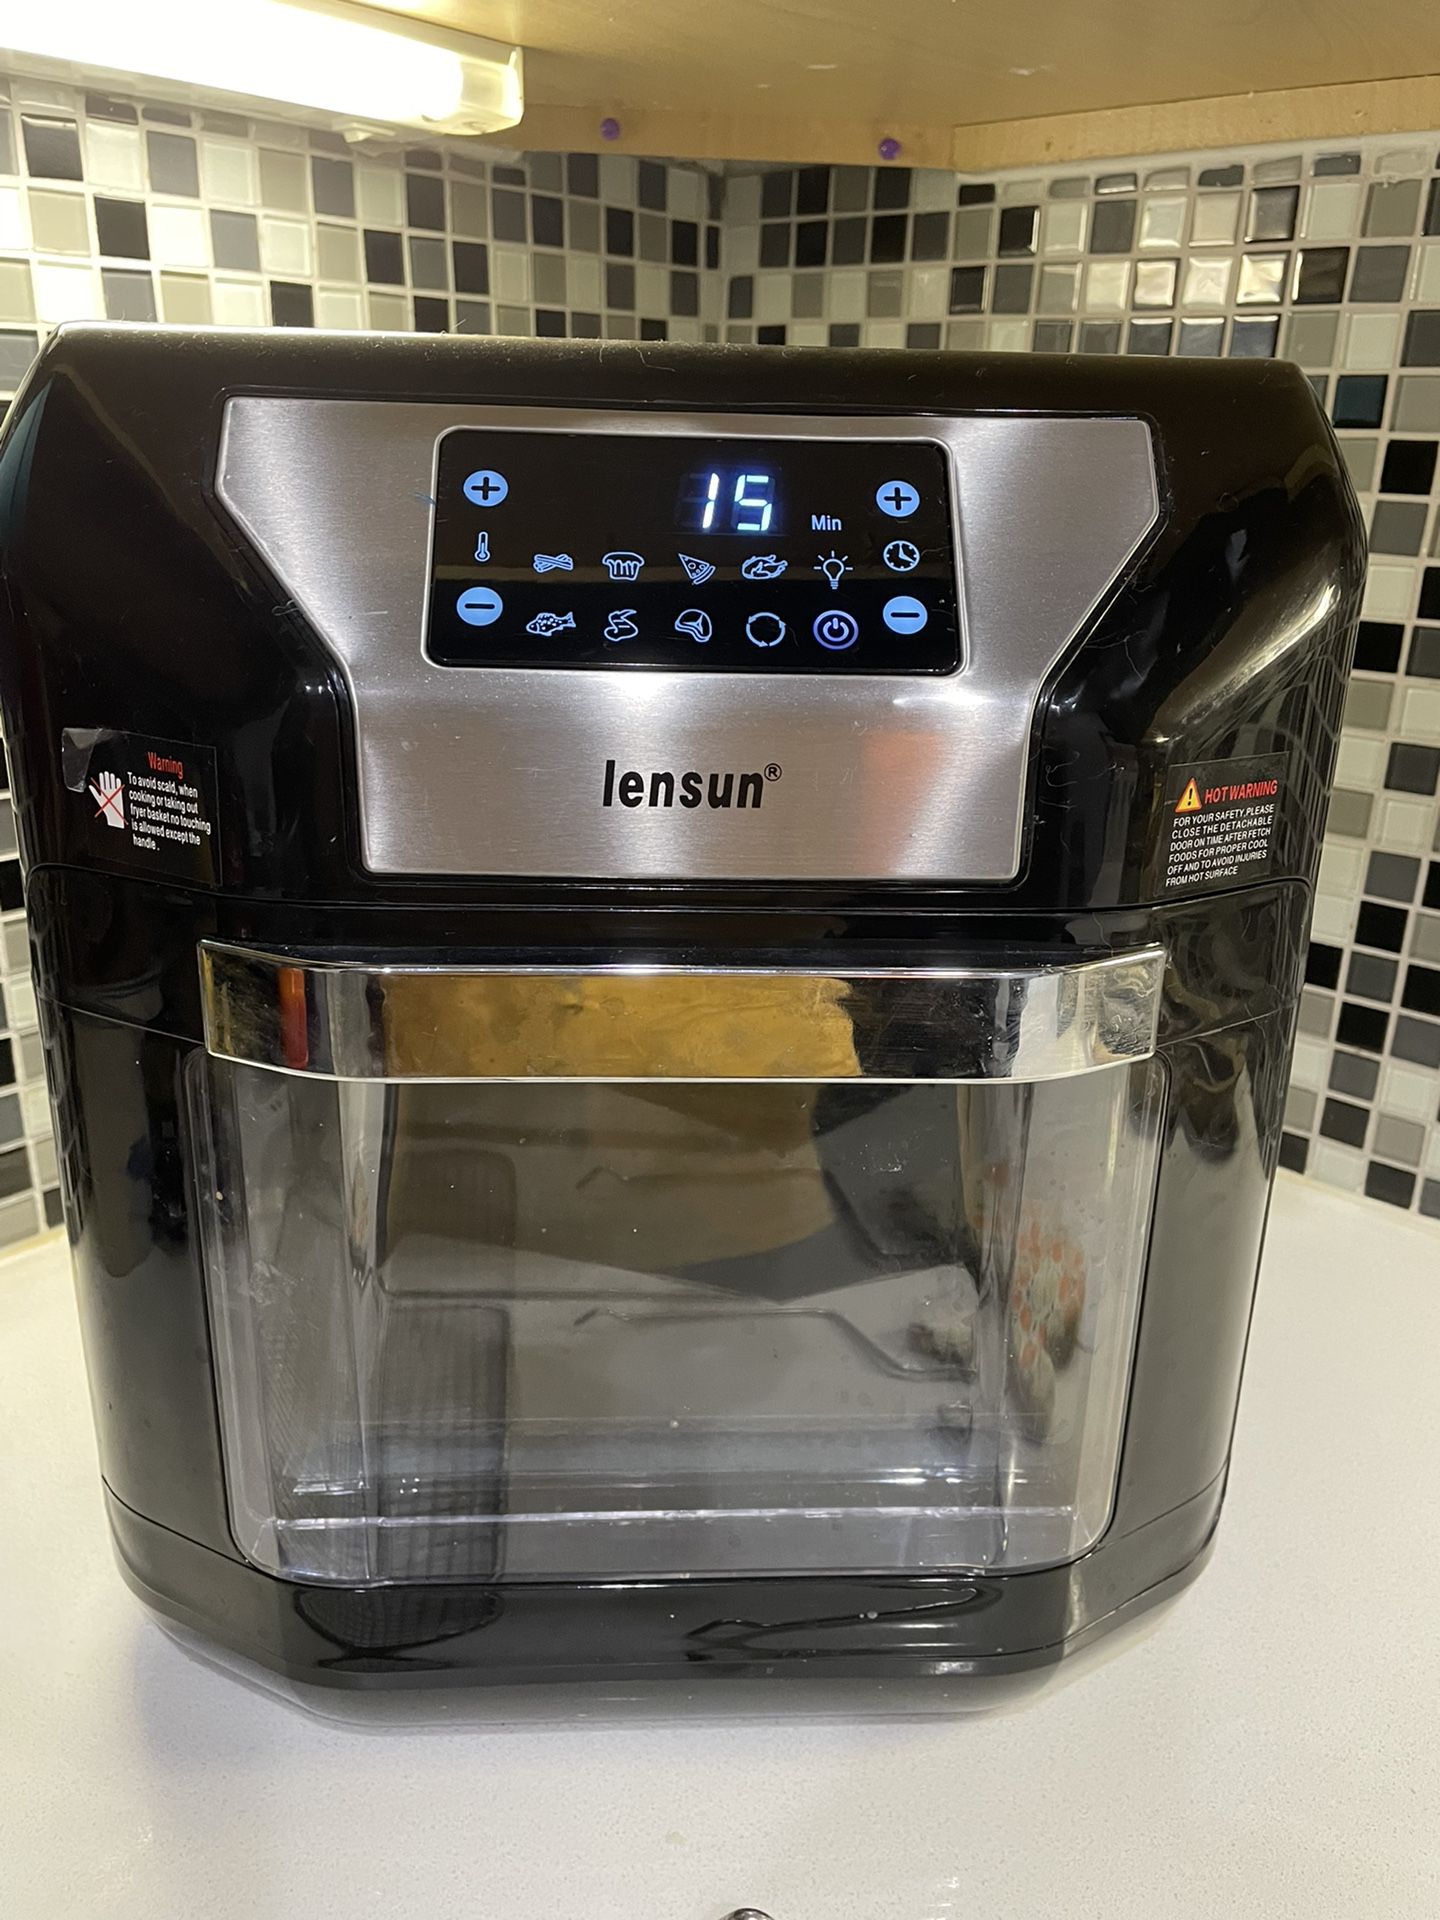 NEW Black + Decker Toaster Oven w/ Air Fryer for Sale in Houston, TX -  OfferUp